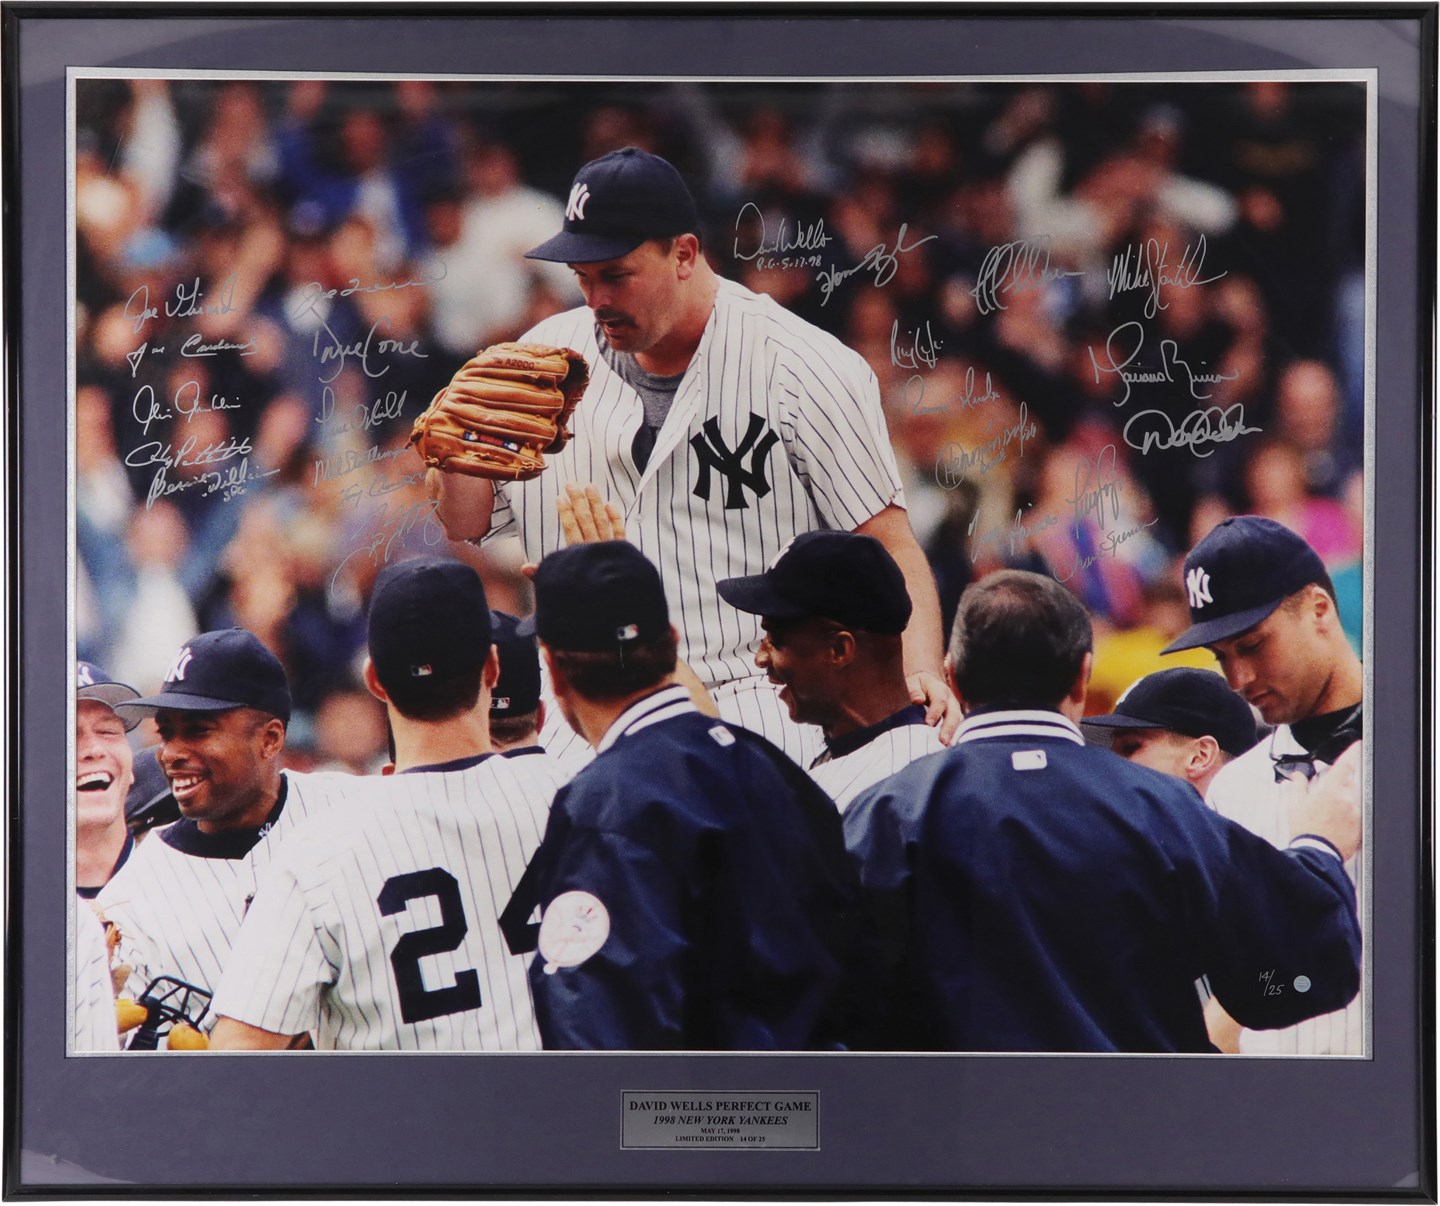 Baseball Autographs - 1998 New York Yankees Team-Signed David Wells Perfect Game Oversized Photograph - Limited Edition #14/25 (23 Autos) (JSA)